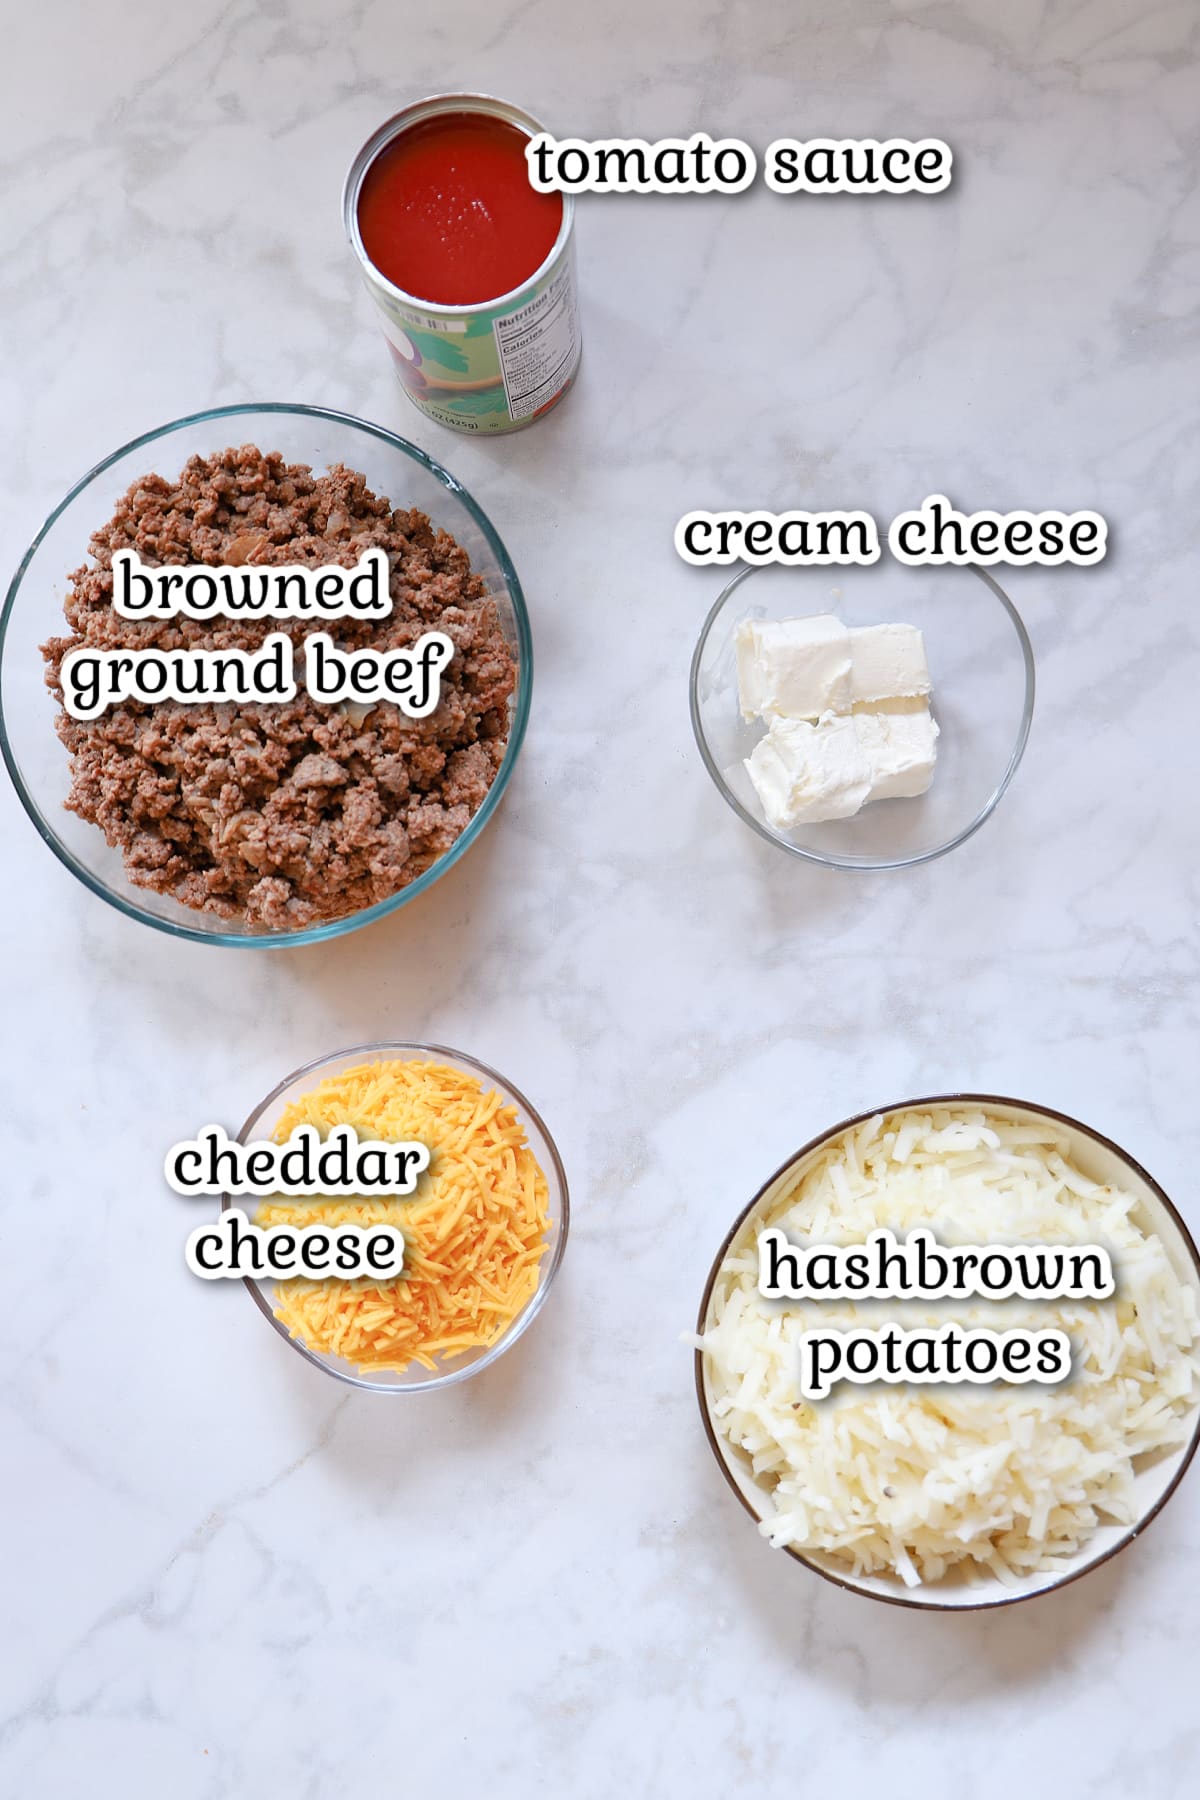 Recipe ingredients on a white surface.